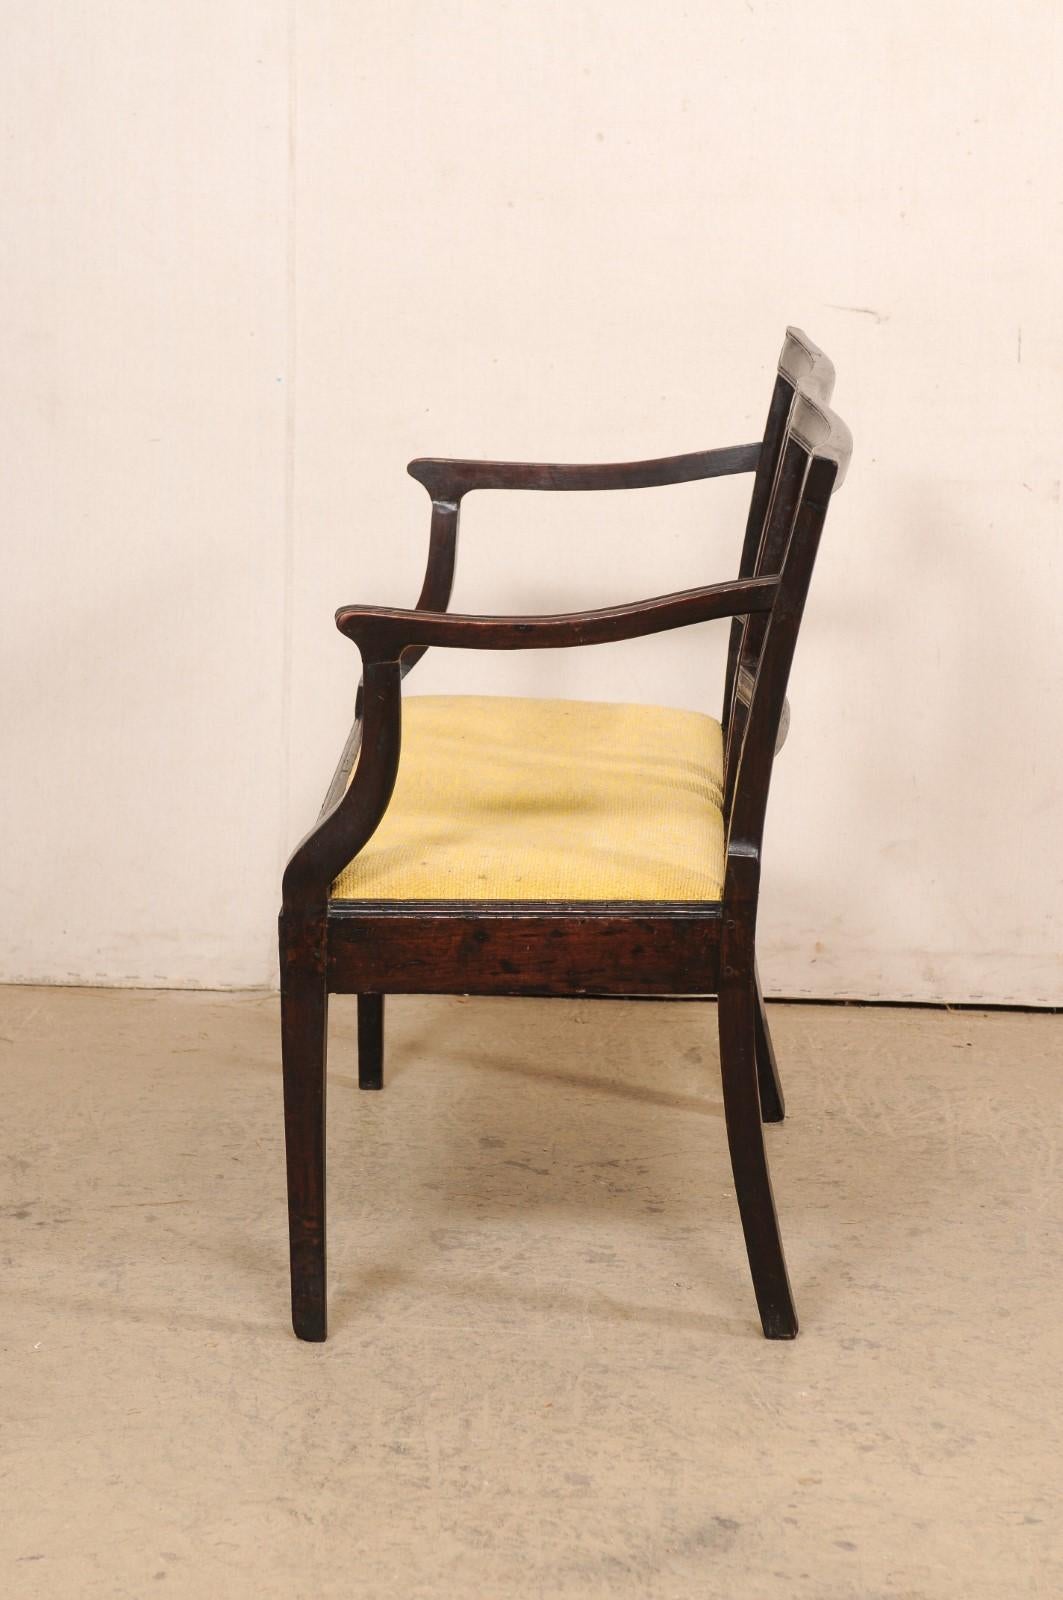 Italian Neoclassic Two-Seat Chair Settee, Late 18th C. For Sale 4